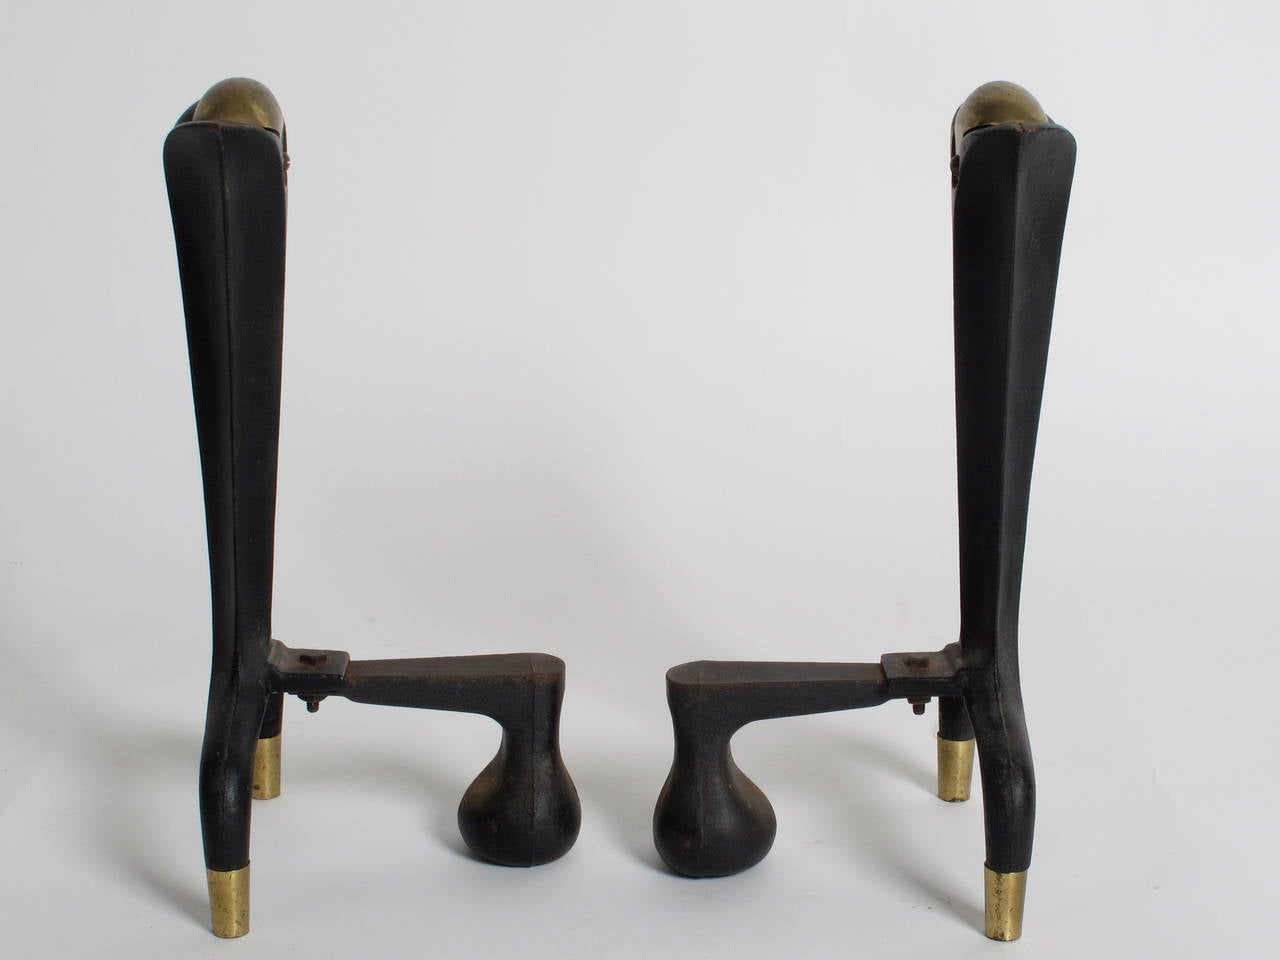 Pair of Donald Deskey for Bennett andirons. Solid brass crowns and feet. Each is signed on the footer.